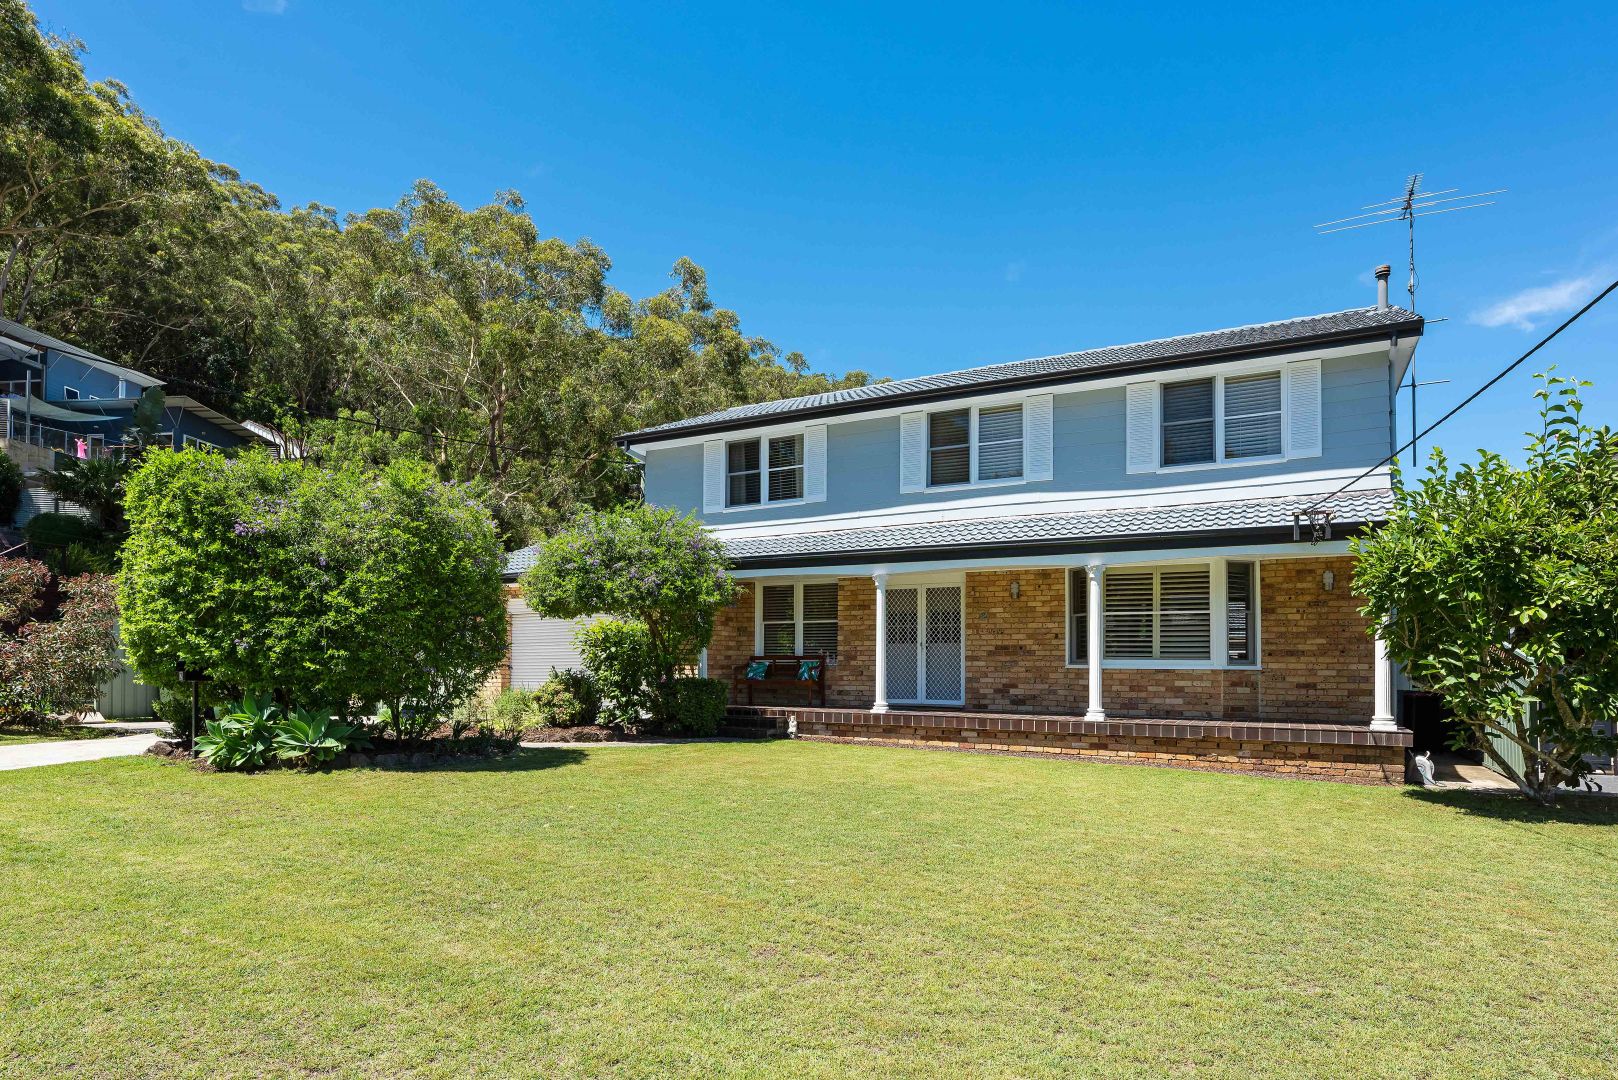 2 Thames Street, Woronora | Property History & Address Research | Domain